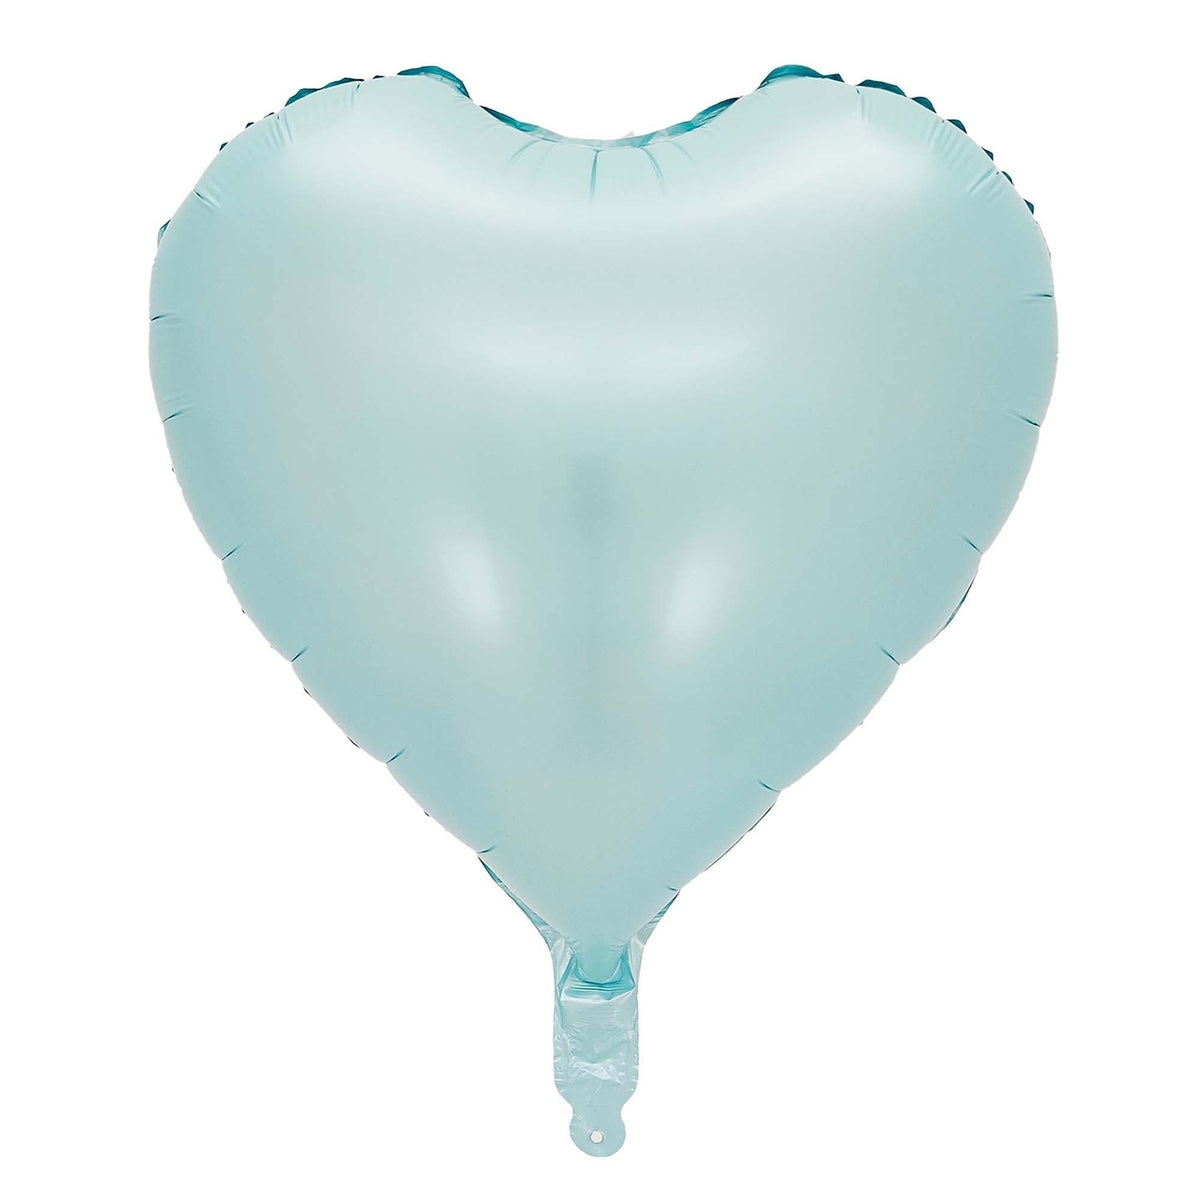 BOOMBA INTERNATIONAL TRADING CO,. LTD Balloons Pastel Light Blue Heart Shaped Foil Balloon, 18 Inches, 1 Count